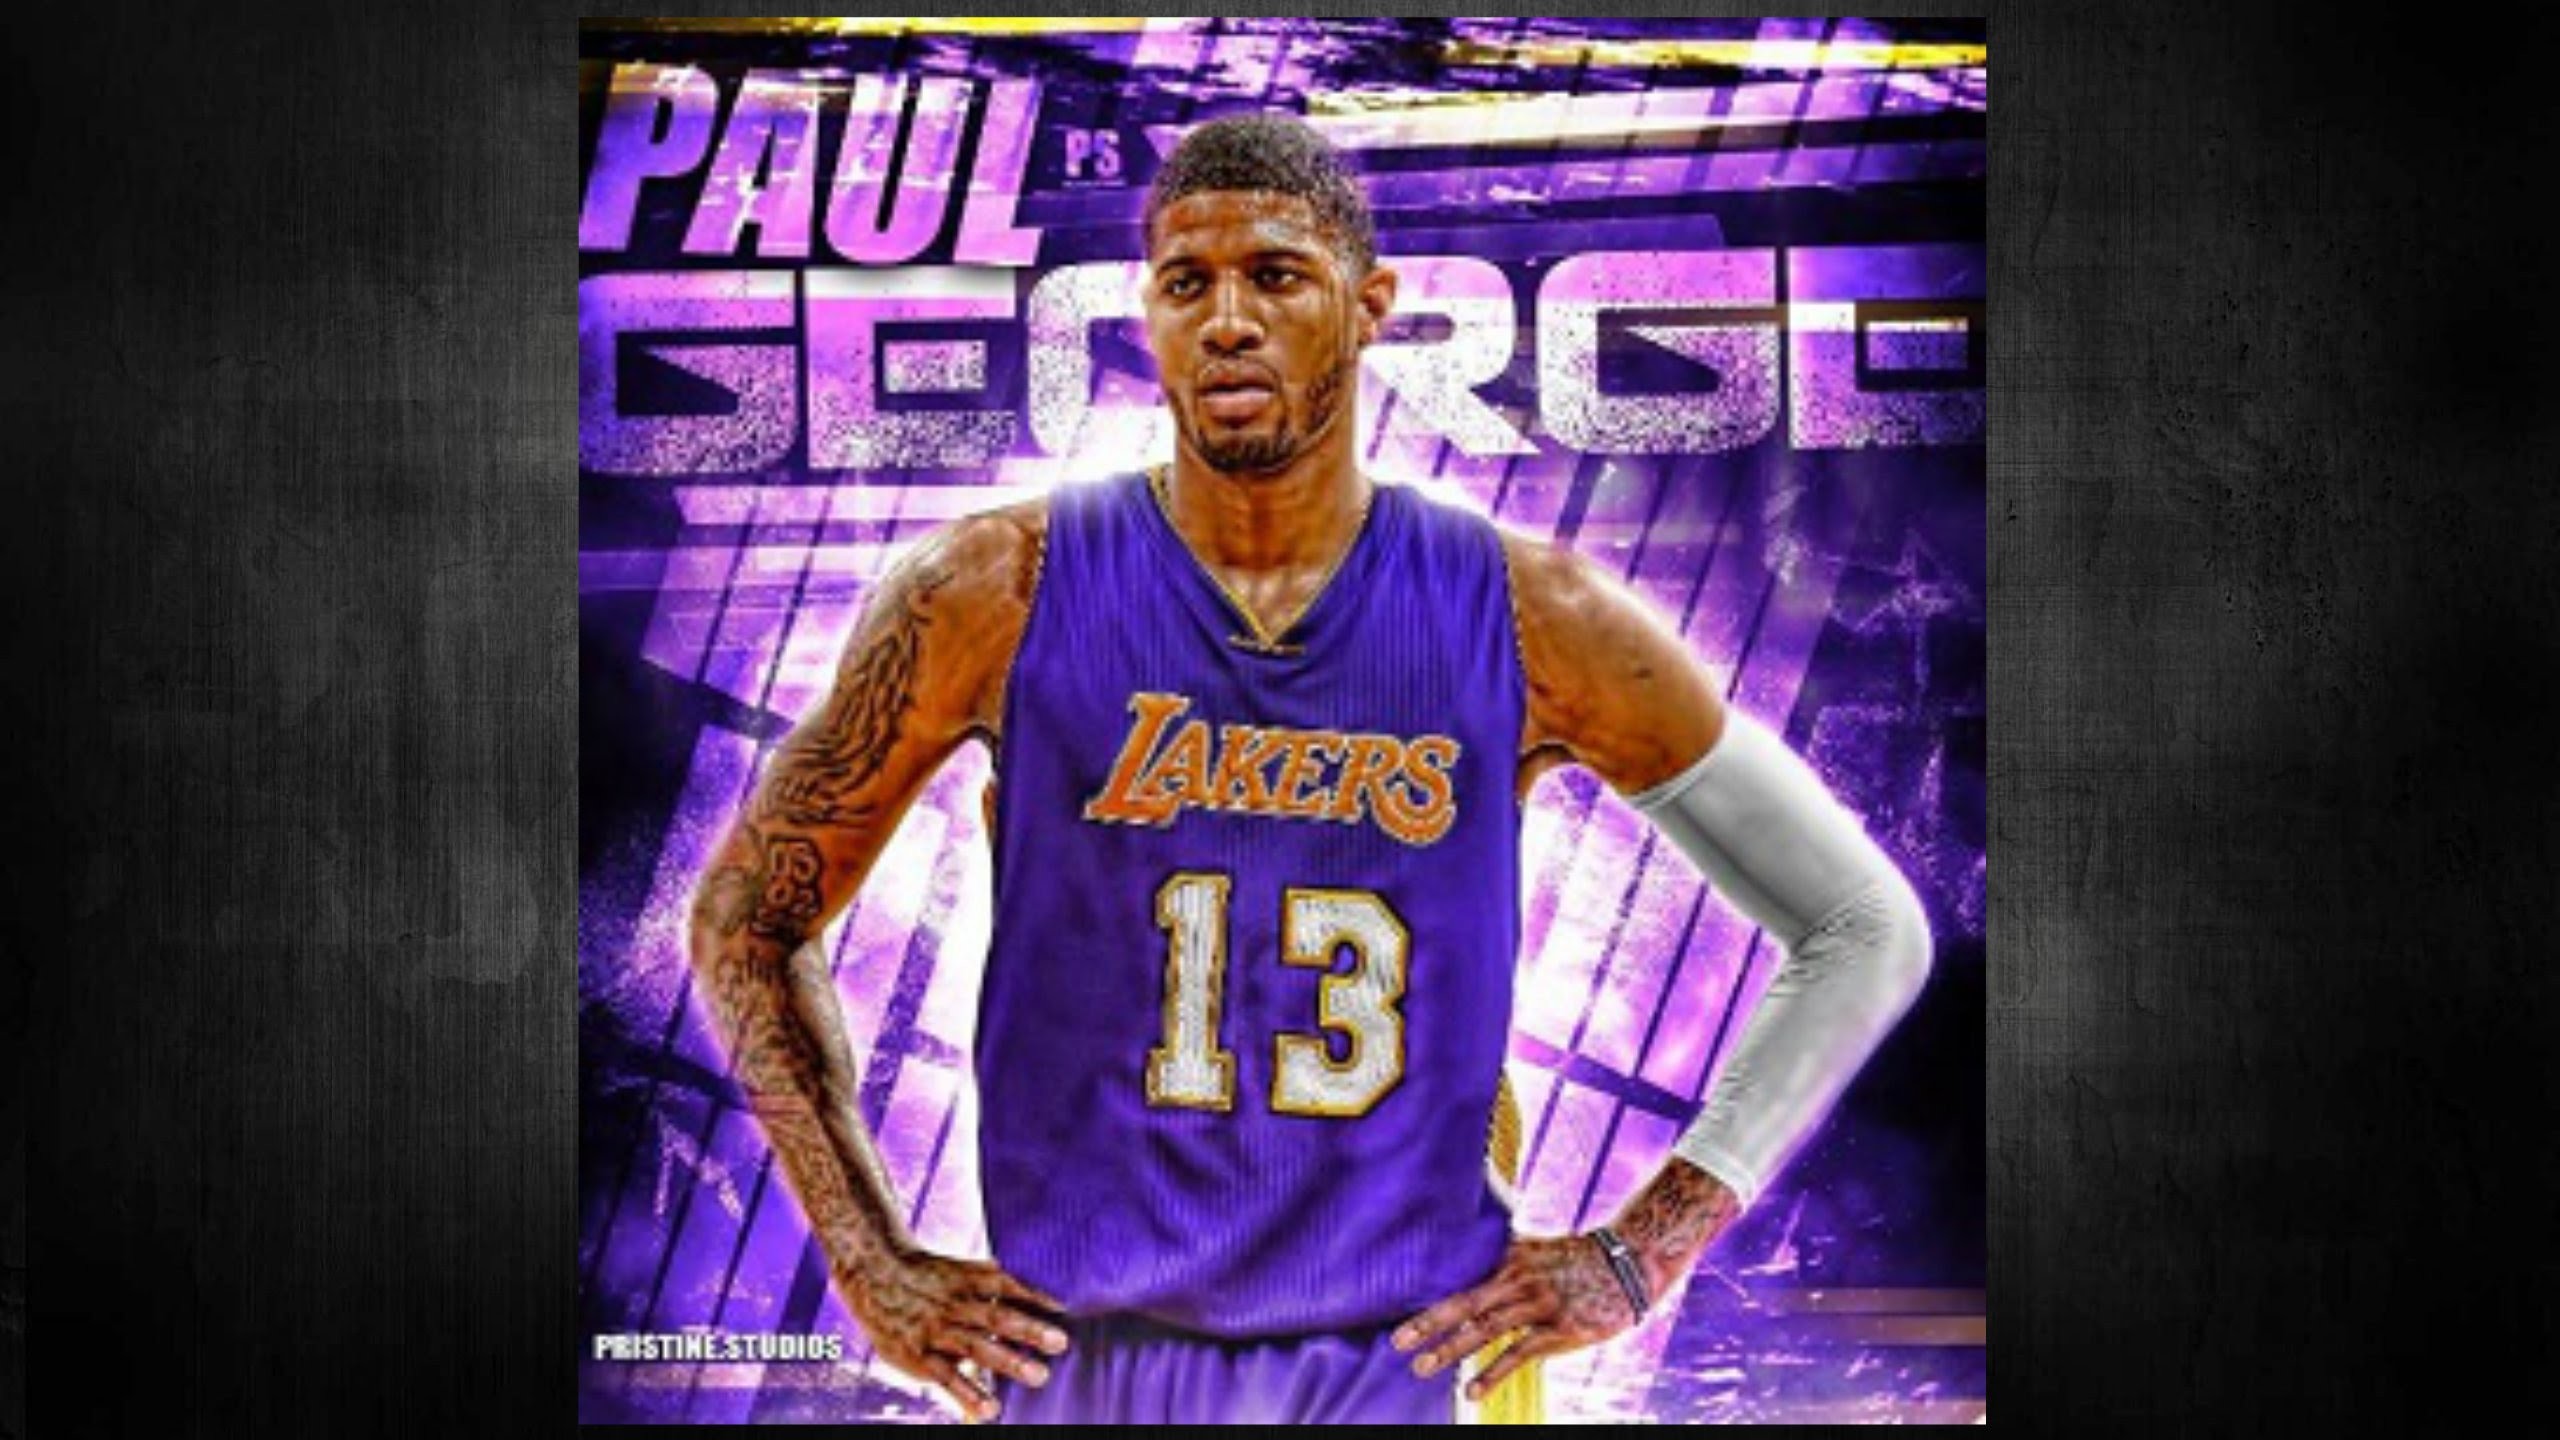 Paul George Clippers Wallpapers